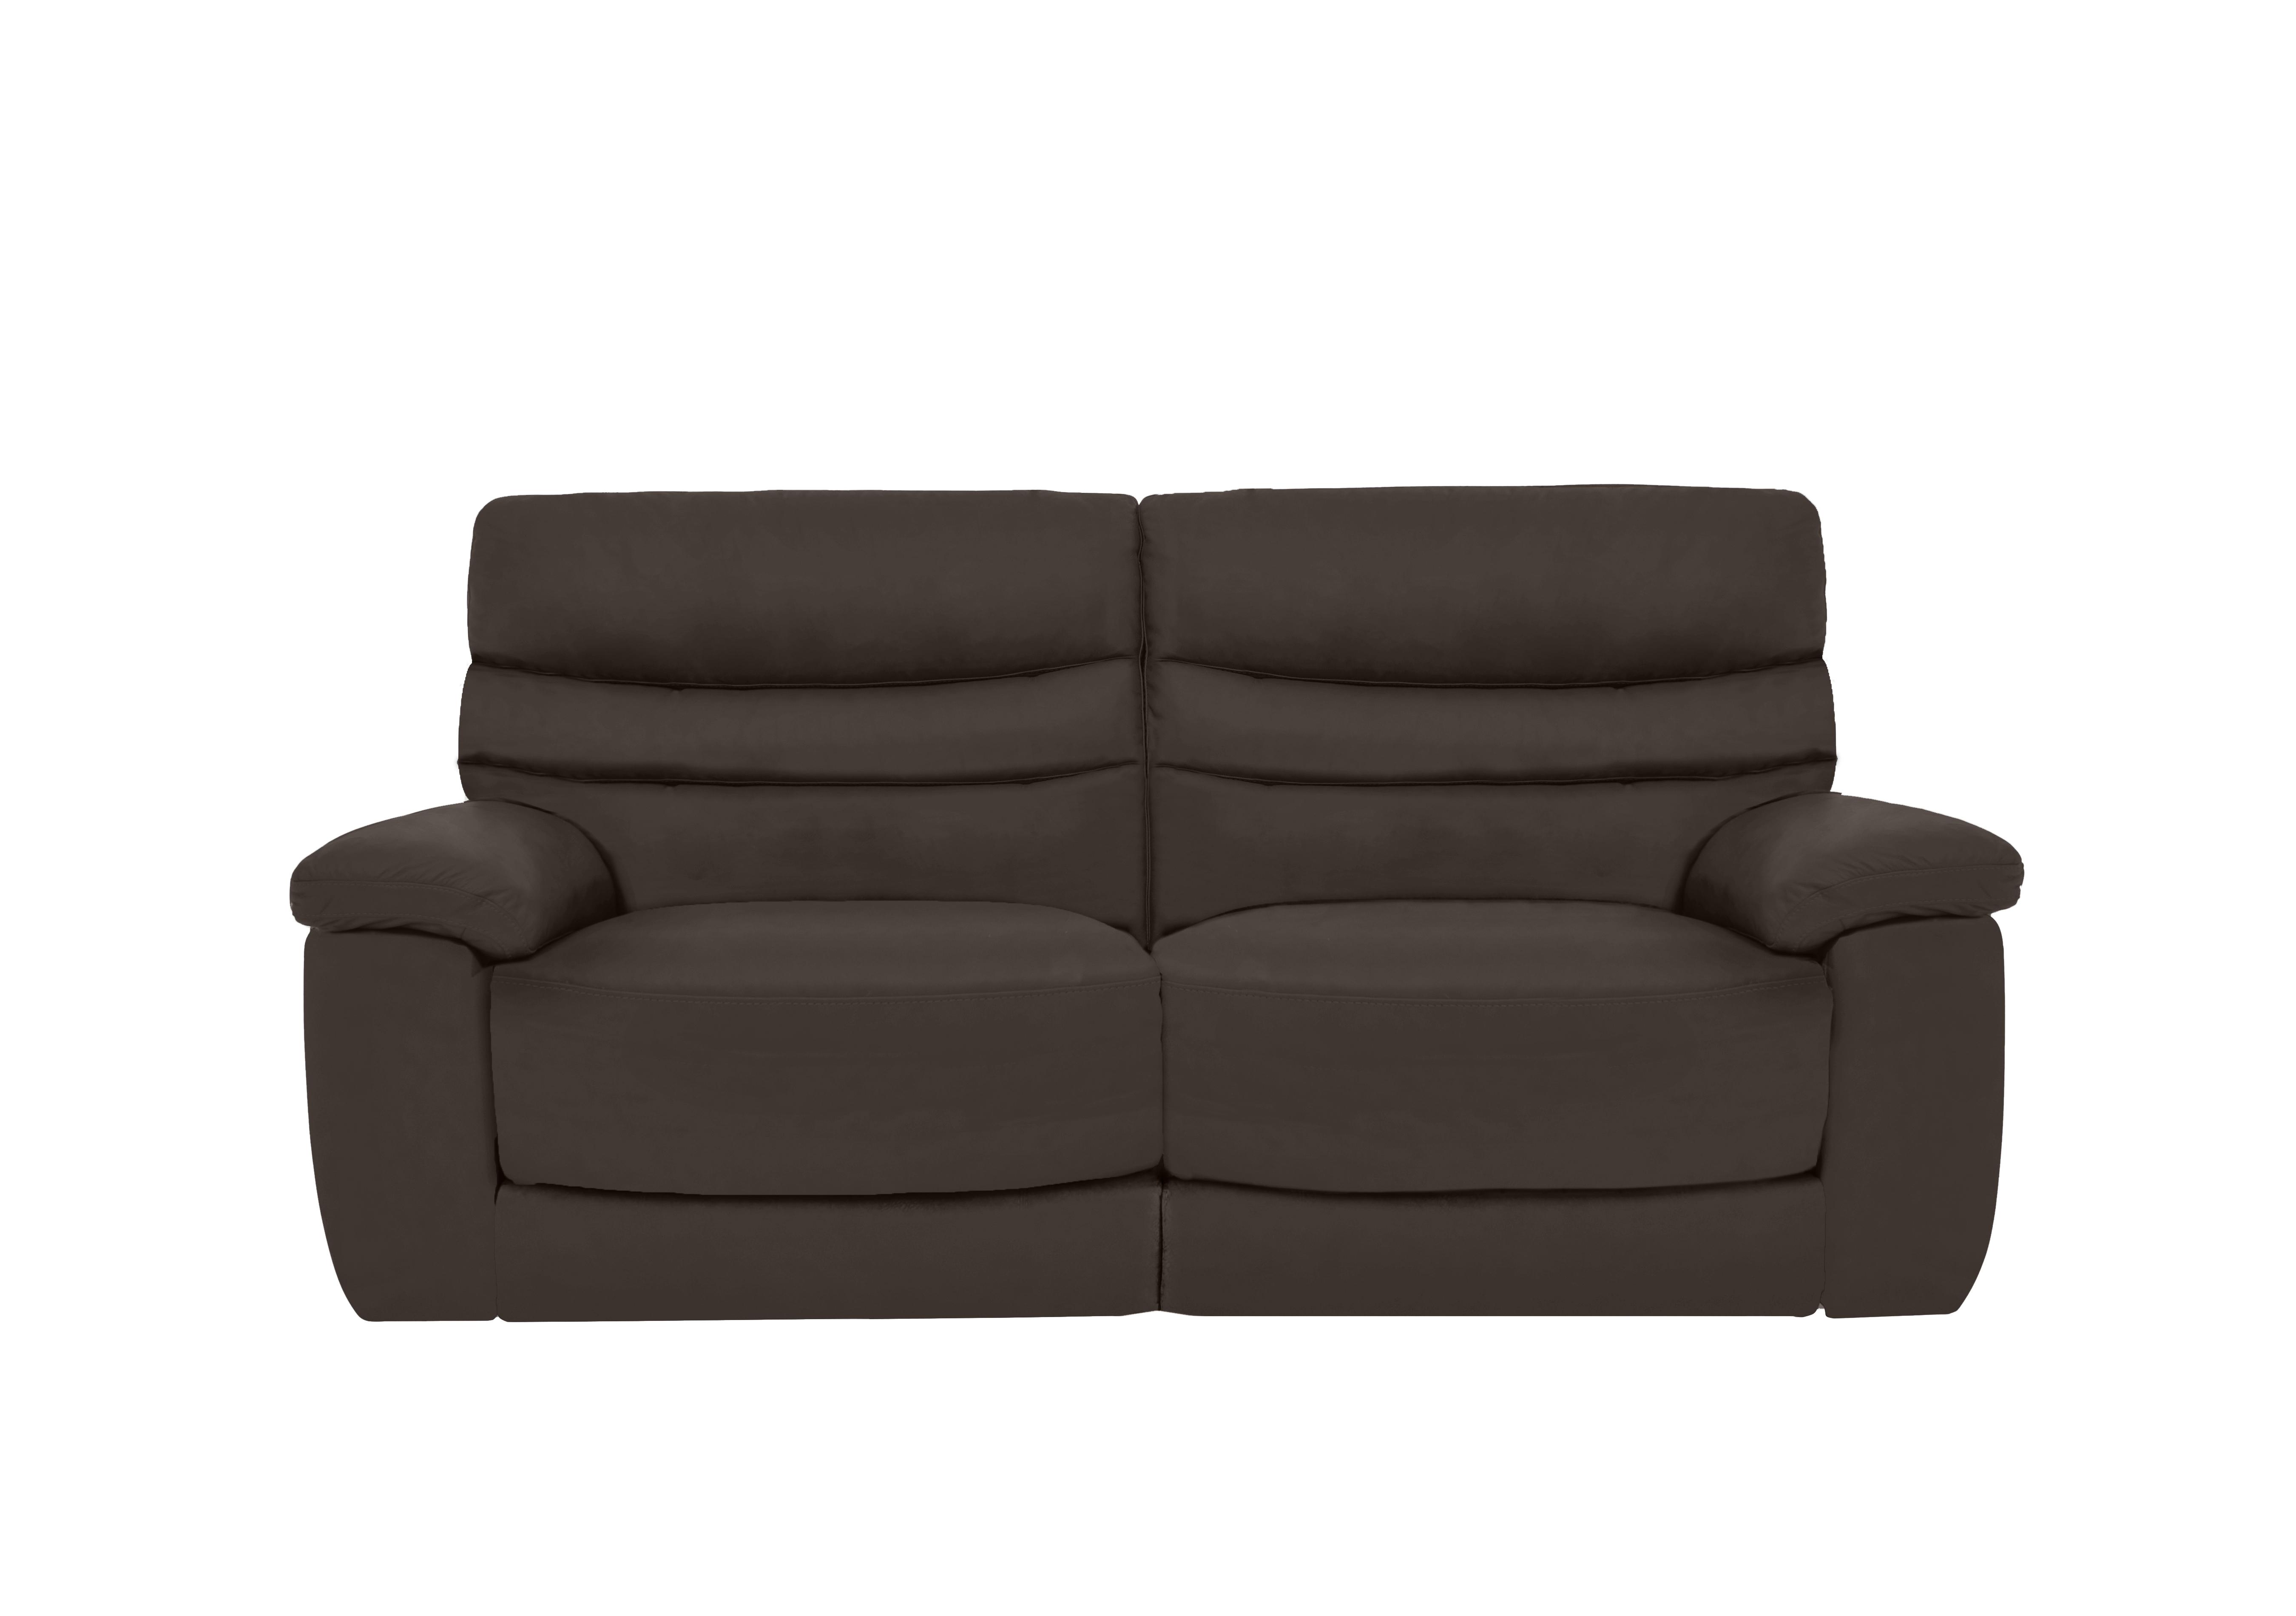 Nimbus 3 Seater Leather Power Recliner Sofa with Power Headrests and Power Lumbar in Bx-037c Walnut on Furniture Village